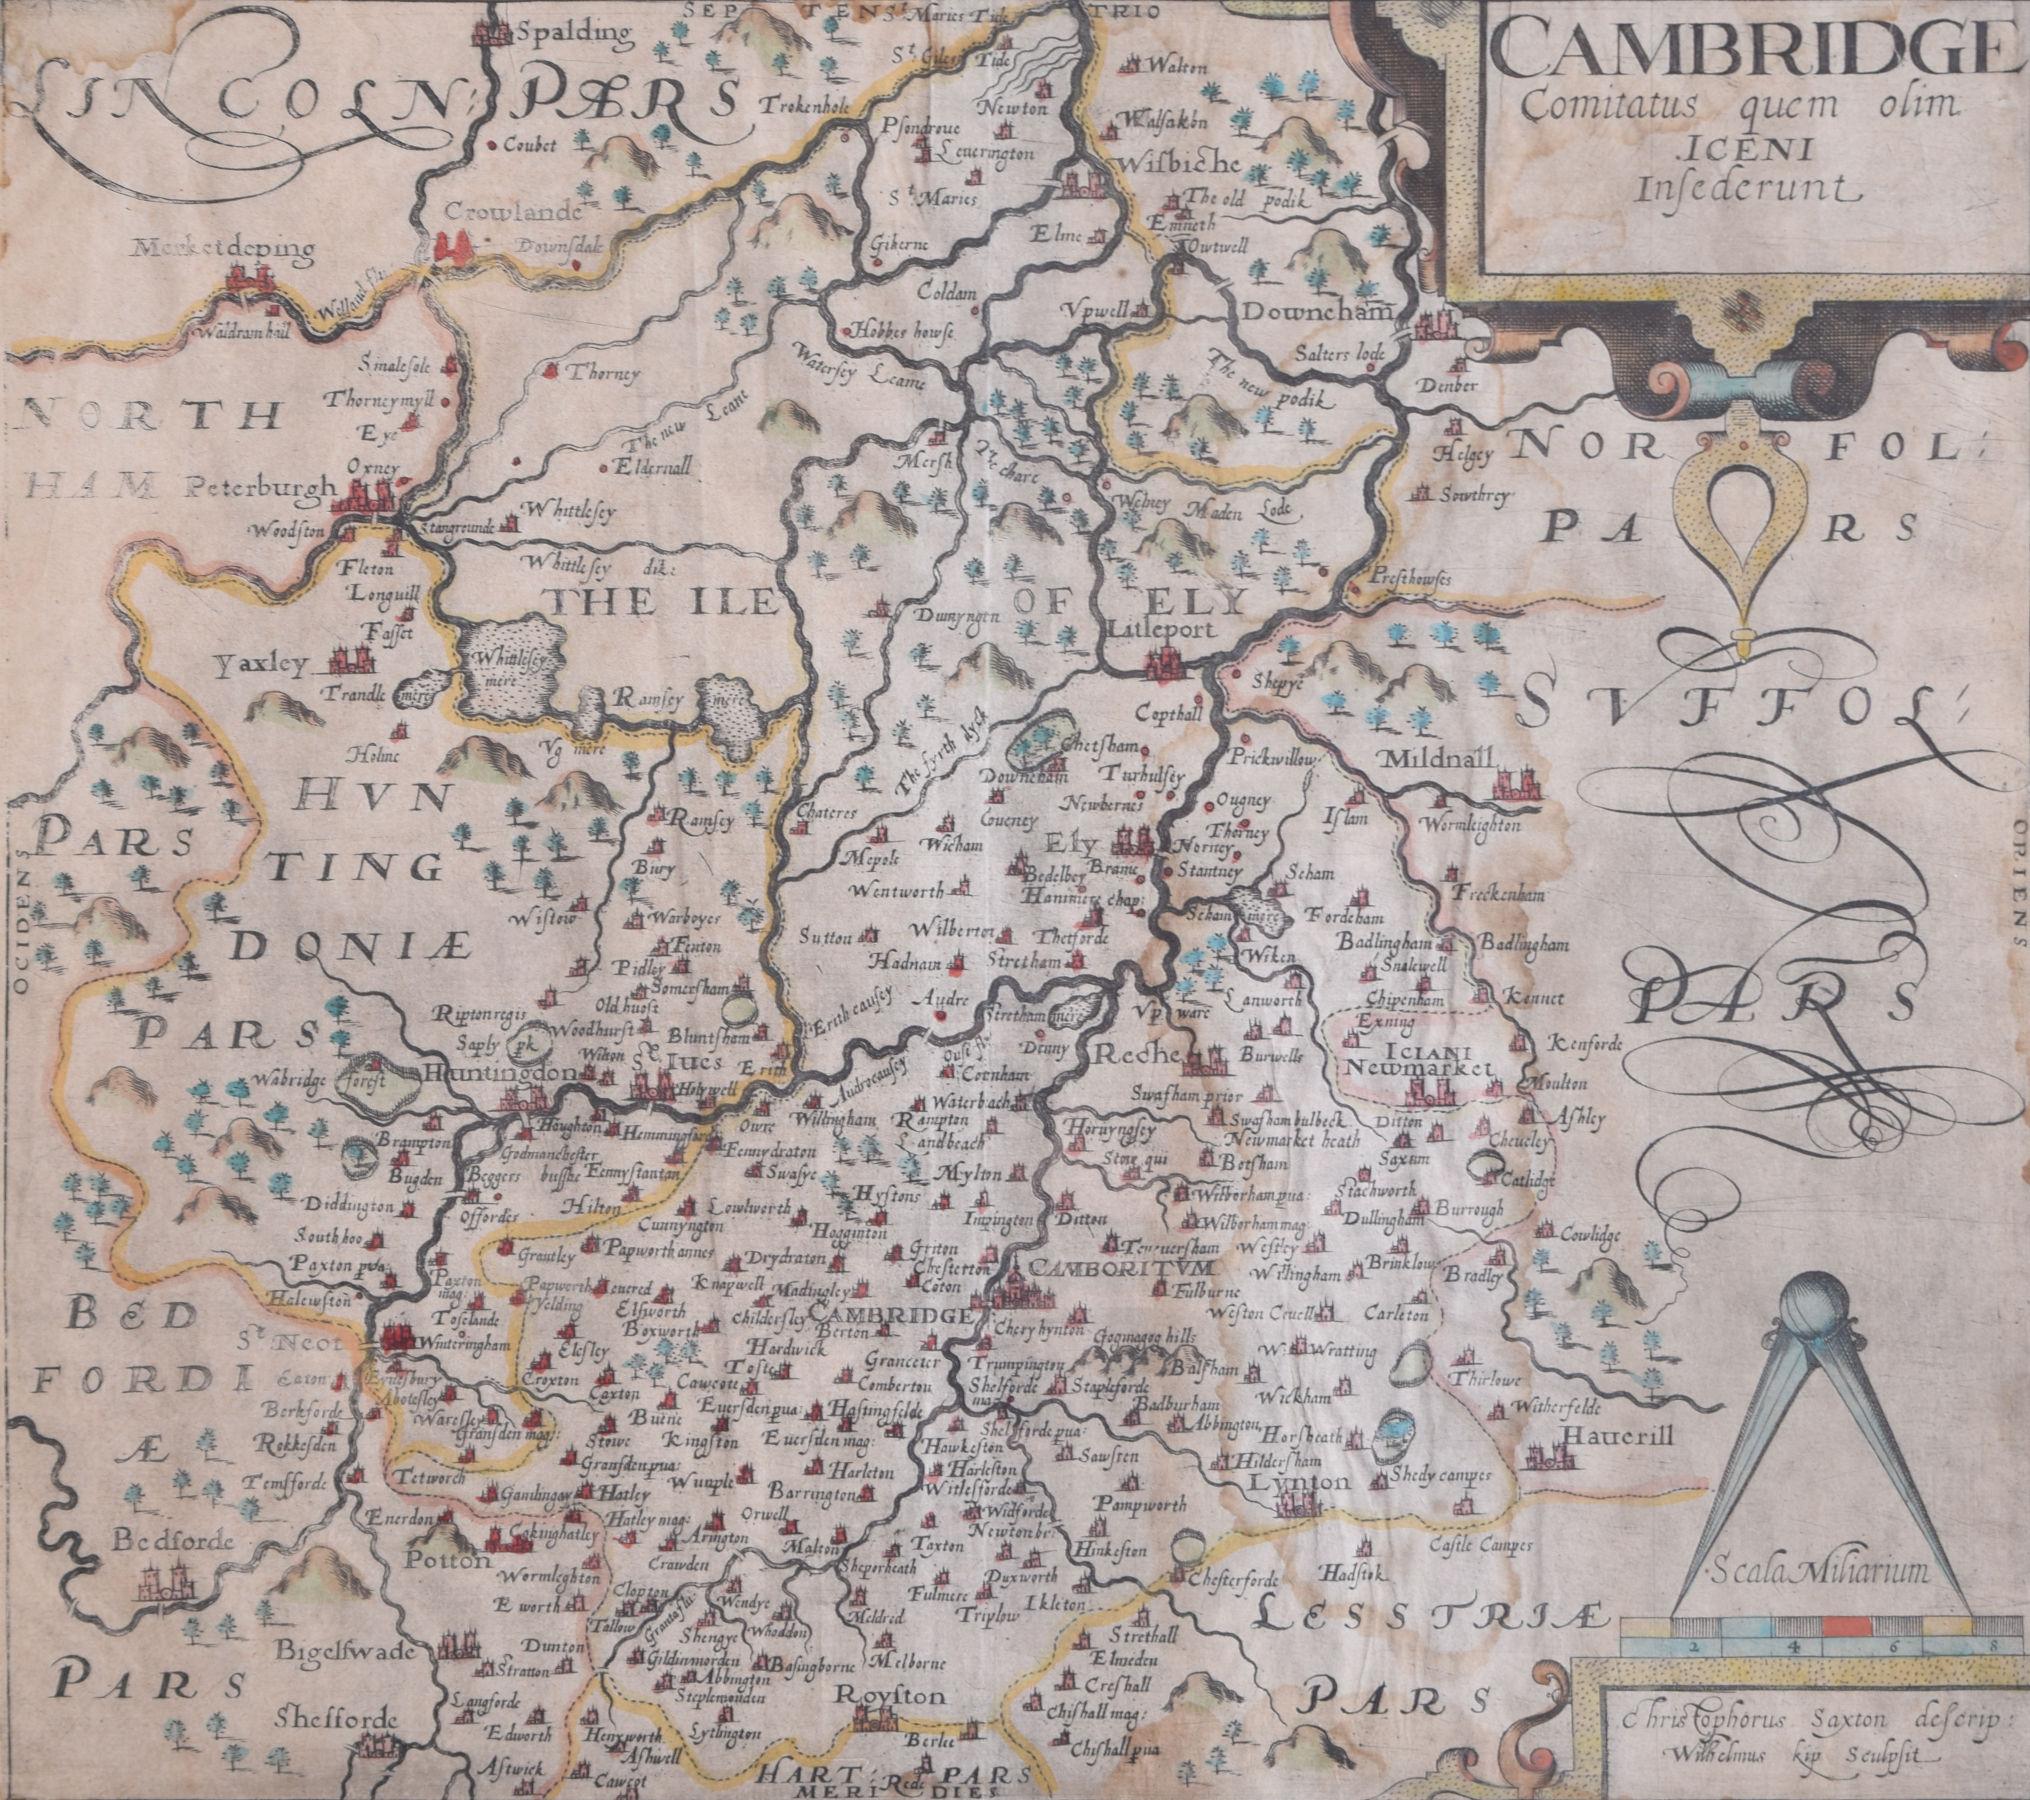 Cambridgeshire map 17th century engraving by Kip after Saxton